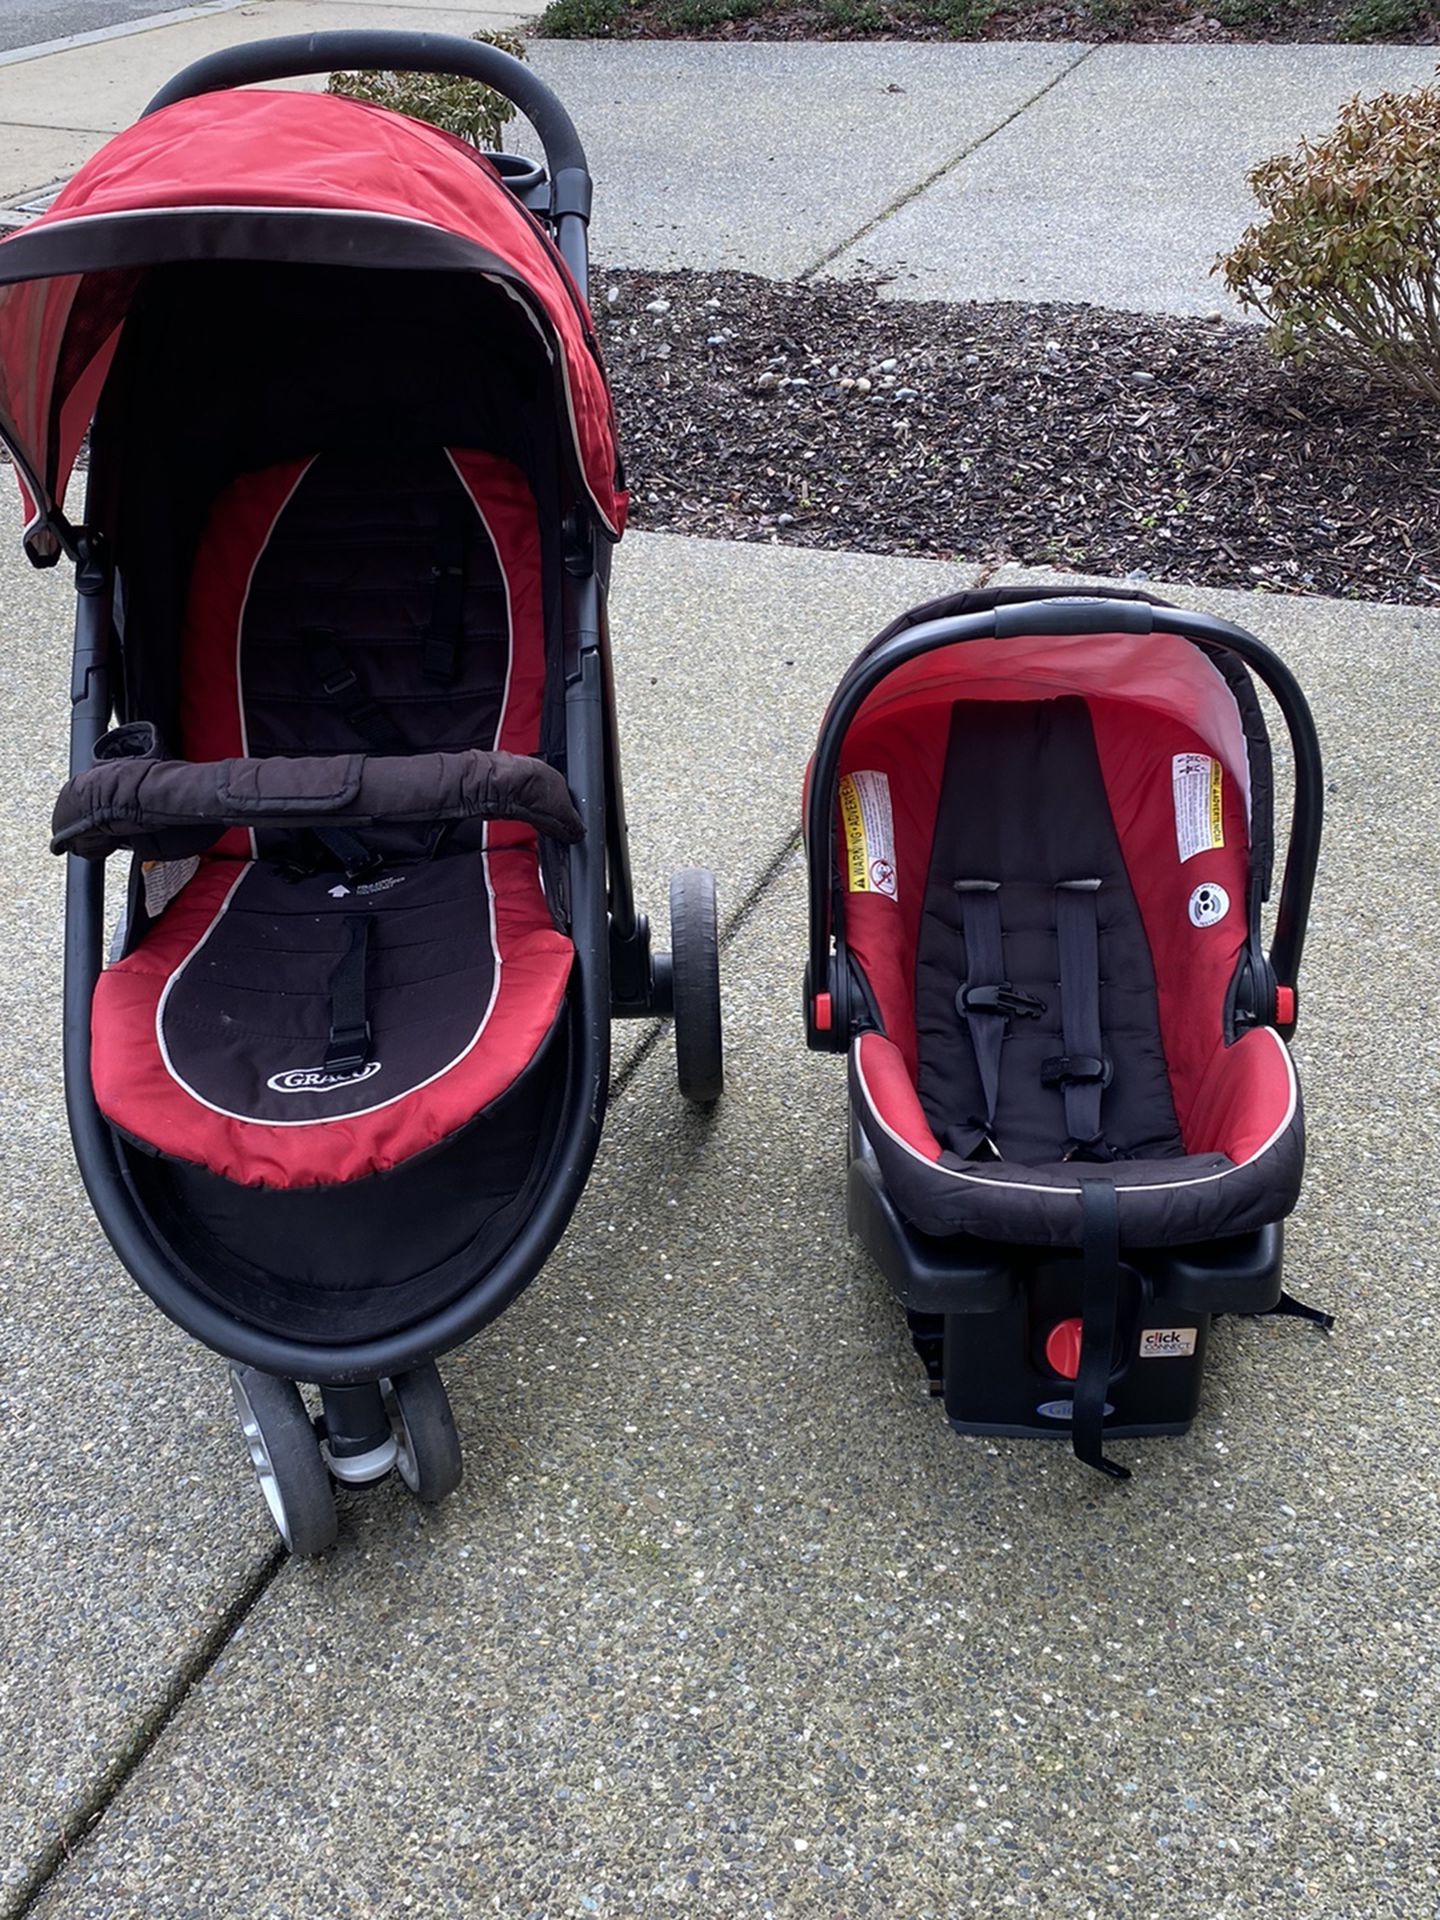 Graco Aire3 Click Connect Travel System